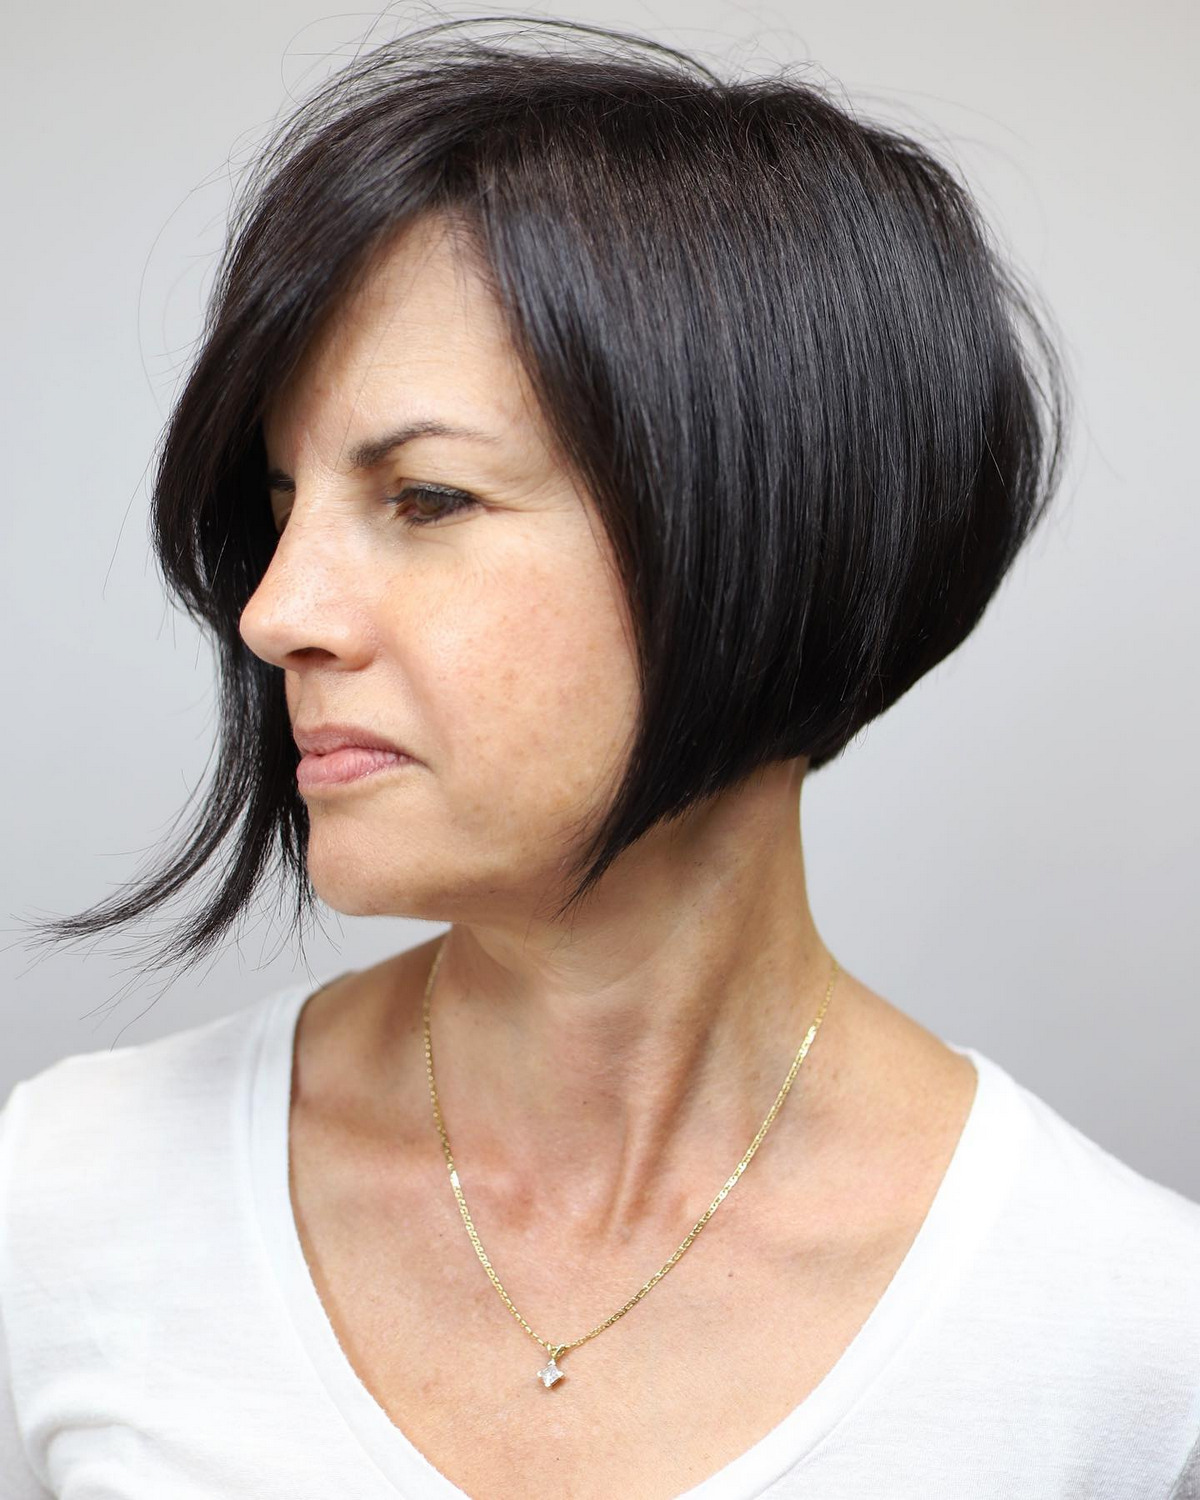 Short A-line Bob with Side Bangs